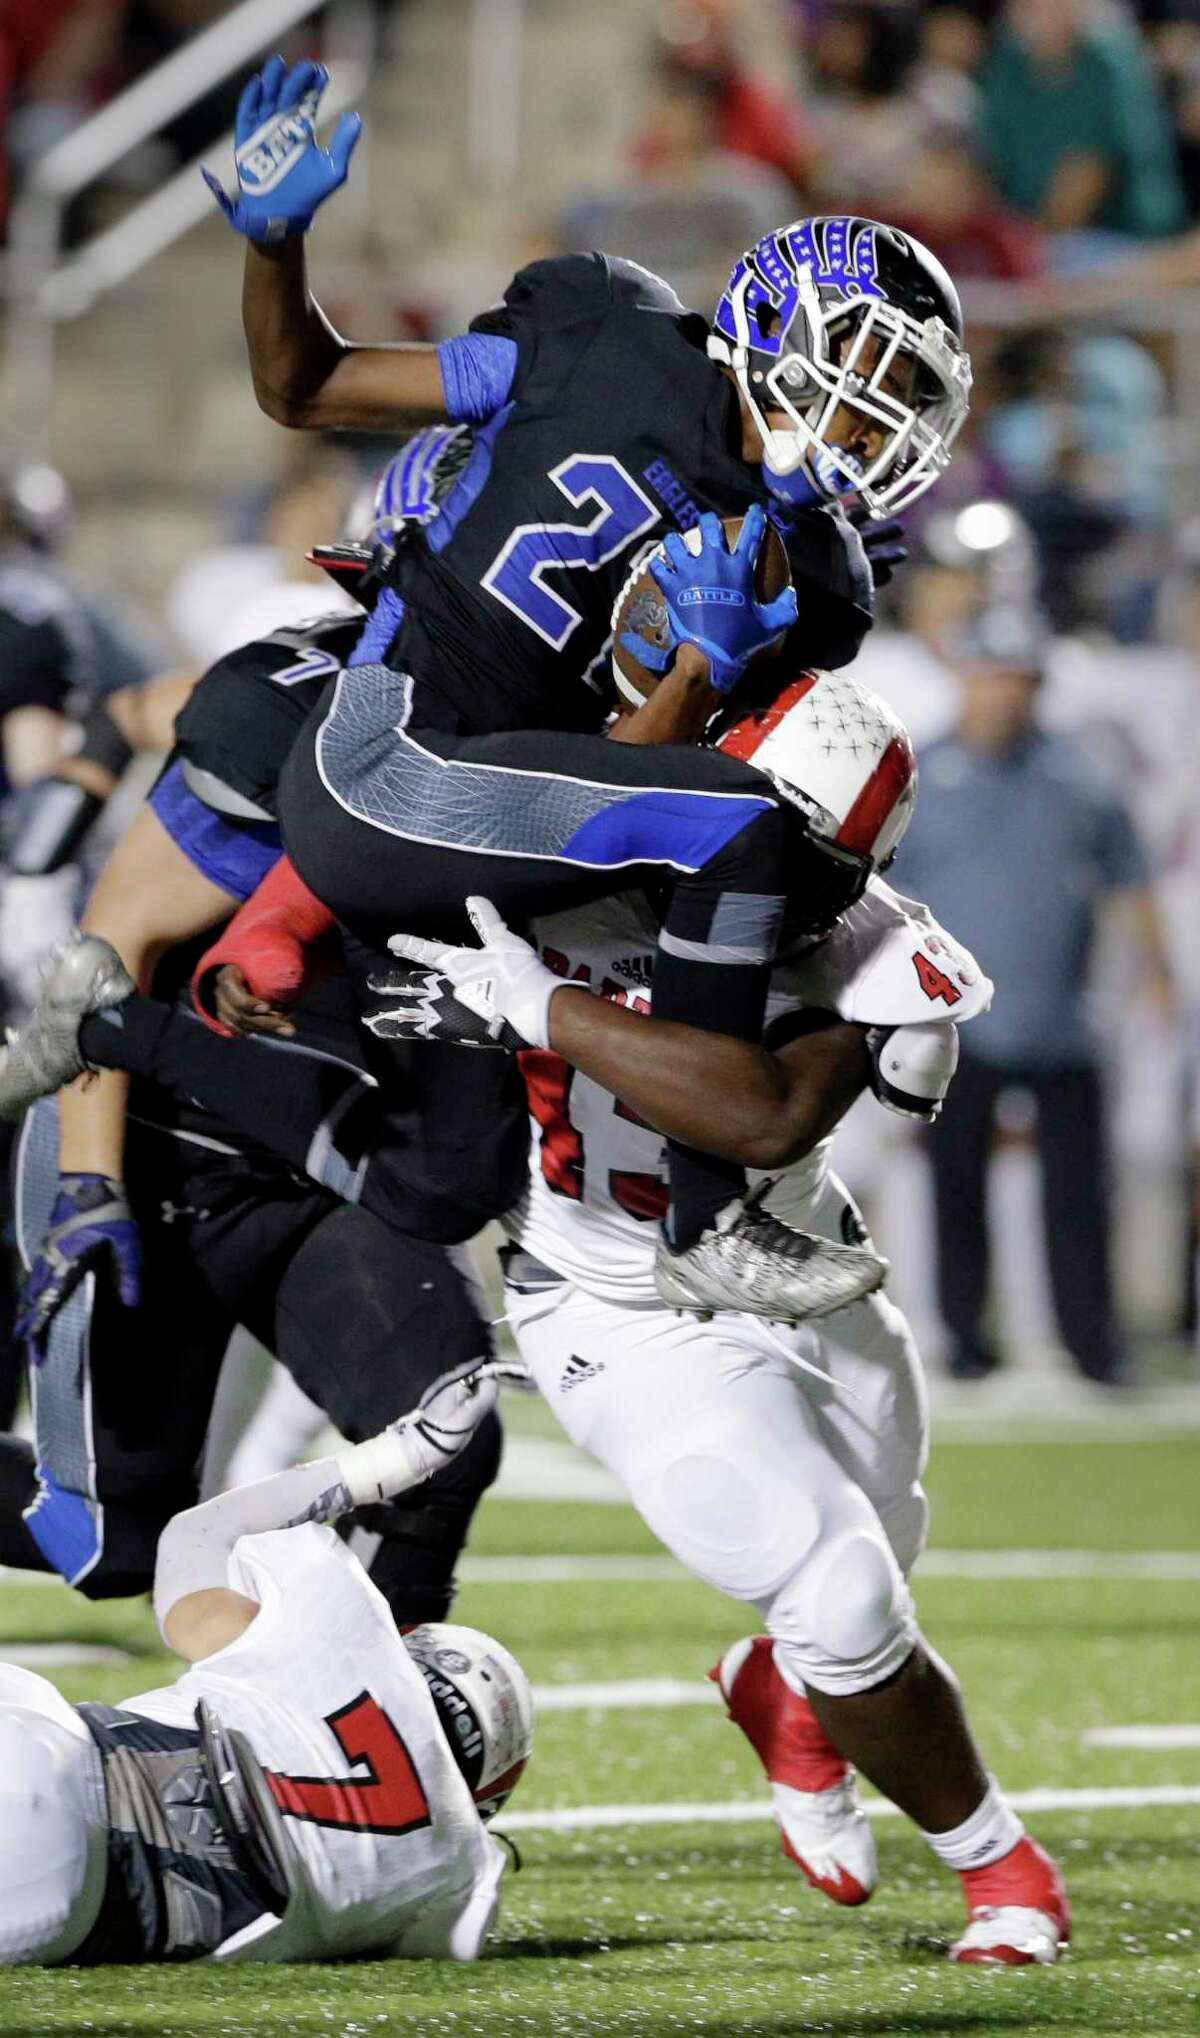 New Caney's C.J. Sanders (21) jumps to avoid the tackle by Porter's Gage Royse (7) and Jordan Lewis (43) in the first half of their game, Nov. 3, 2017, in Porter, TX. (Michael Wyke / For the Chronicle)